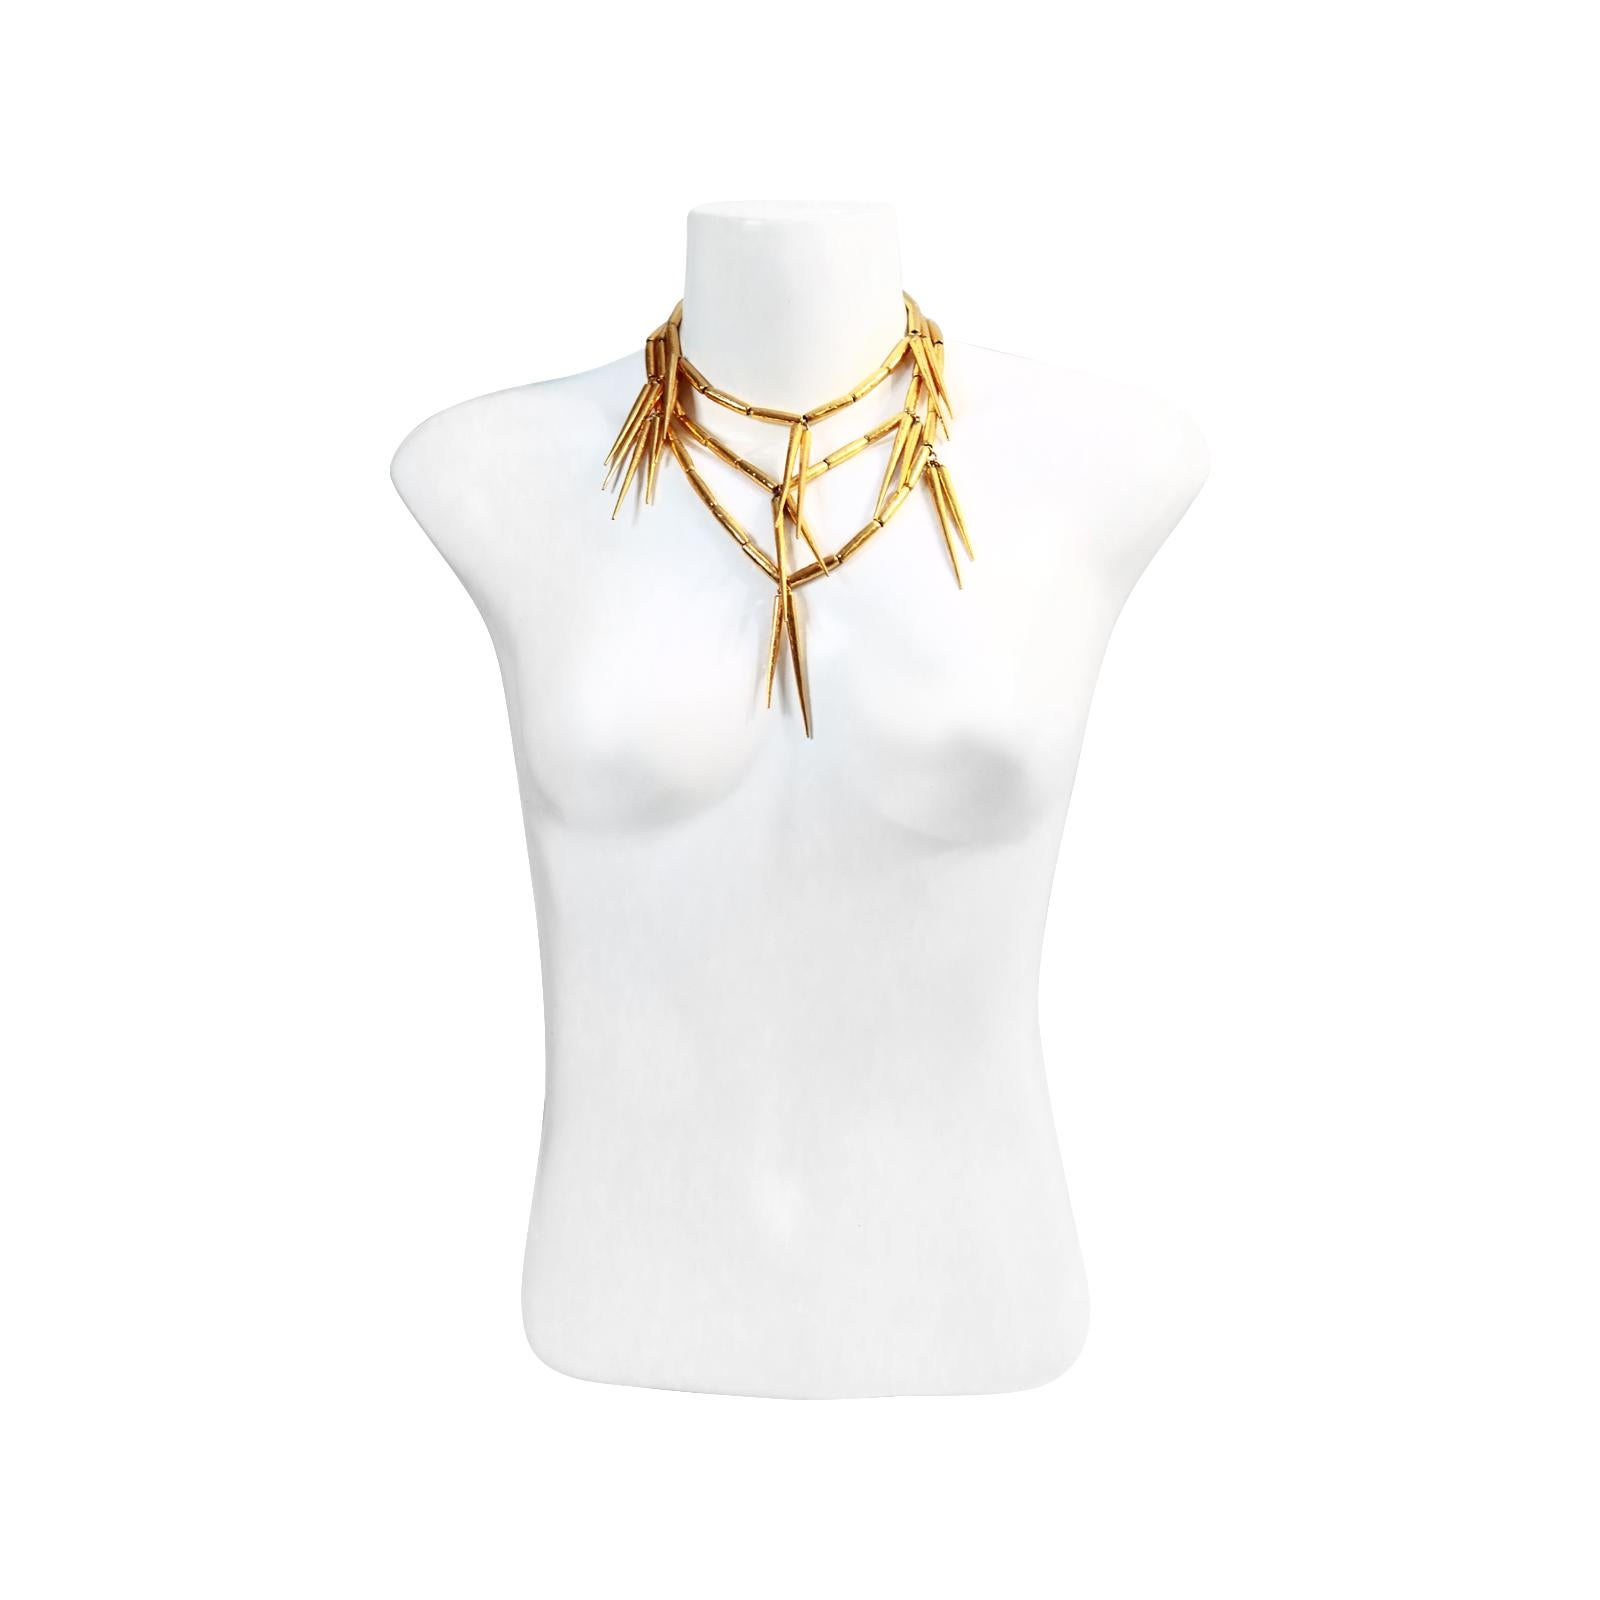 Vintage Christian Dior Gold Spike Necklace Circa 1980s For Sale 4